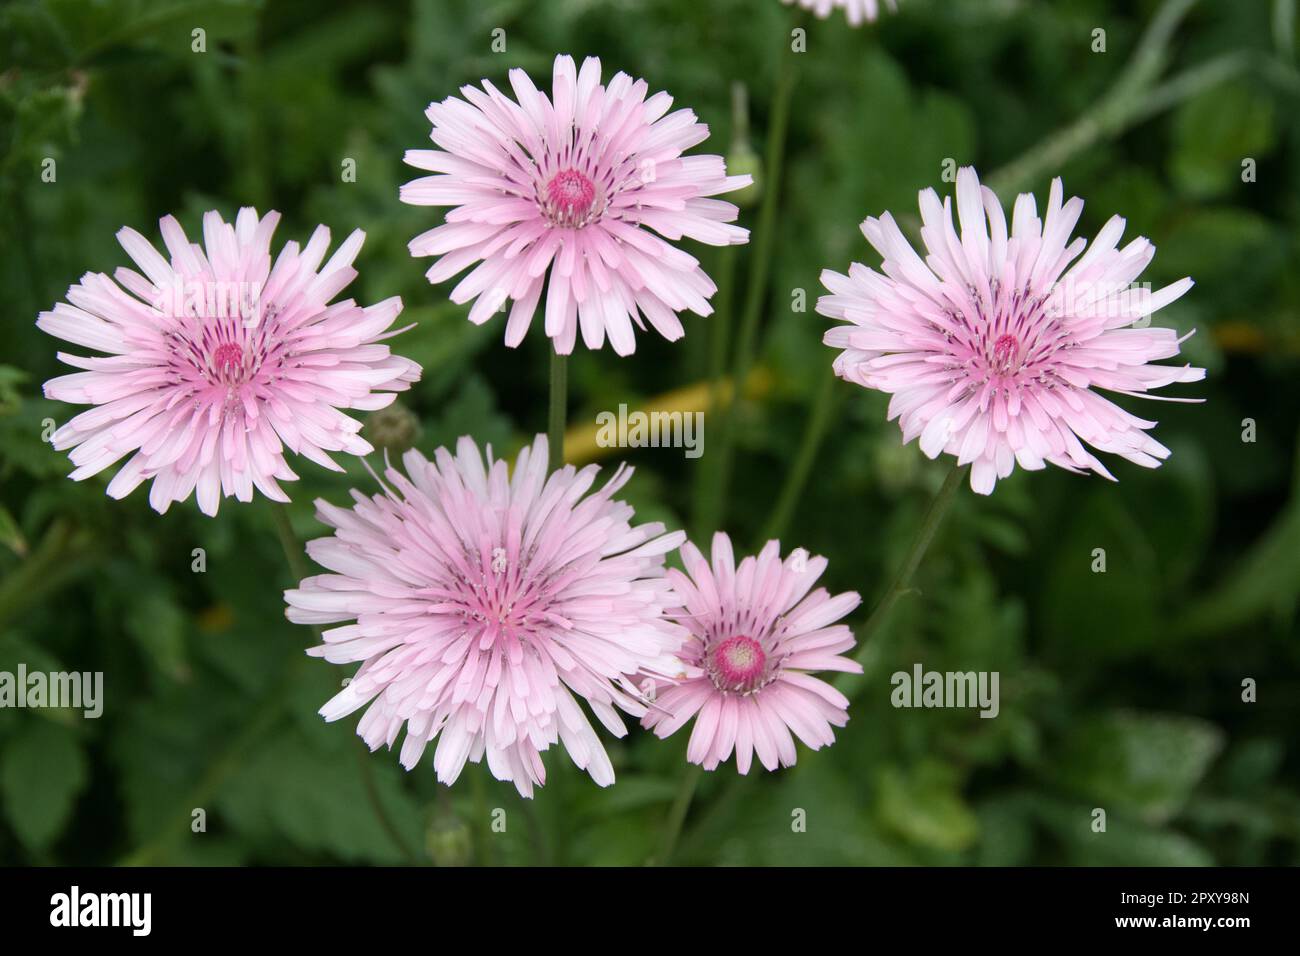 An herbaceous perennial to 30cm tall, forming a rosette of greyish-green, jagged leaves and open sprays of light pink 'dandelions' 3cm wide Stock Photo